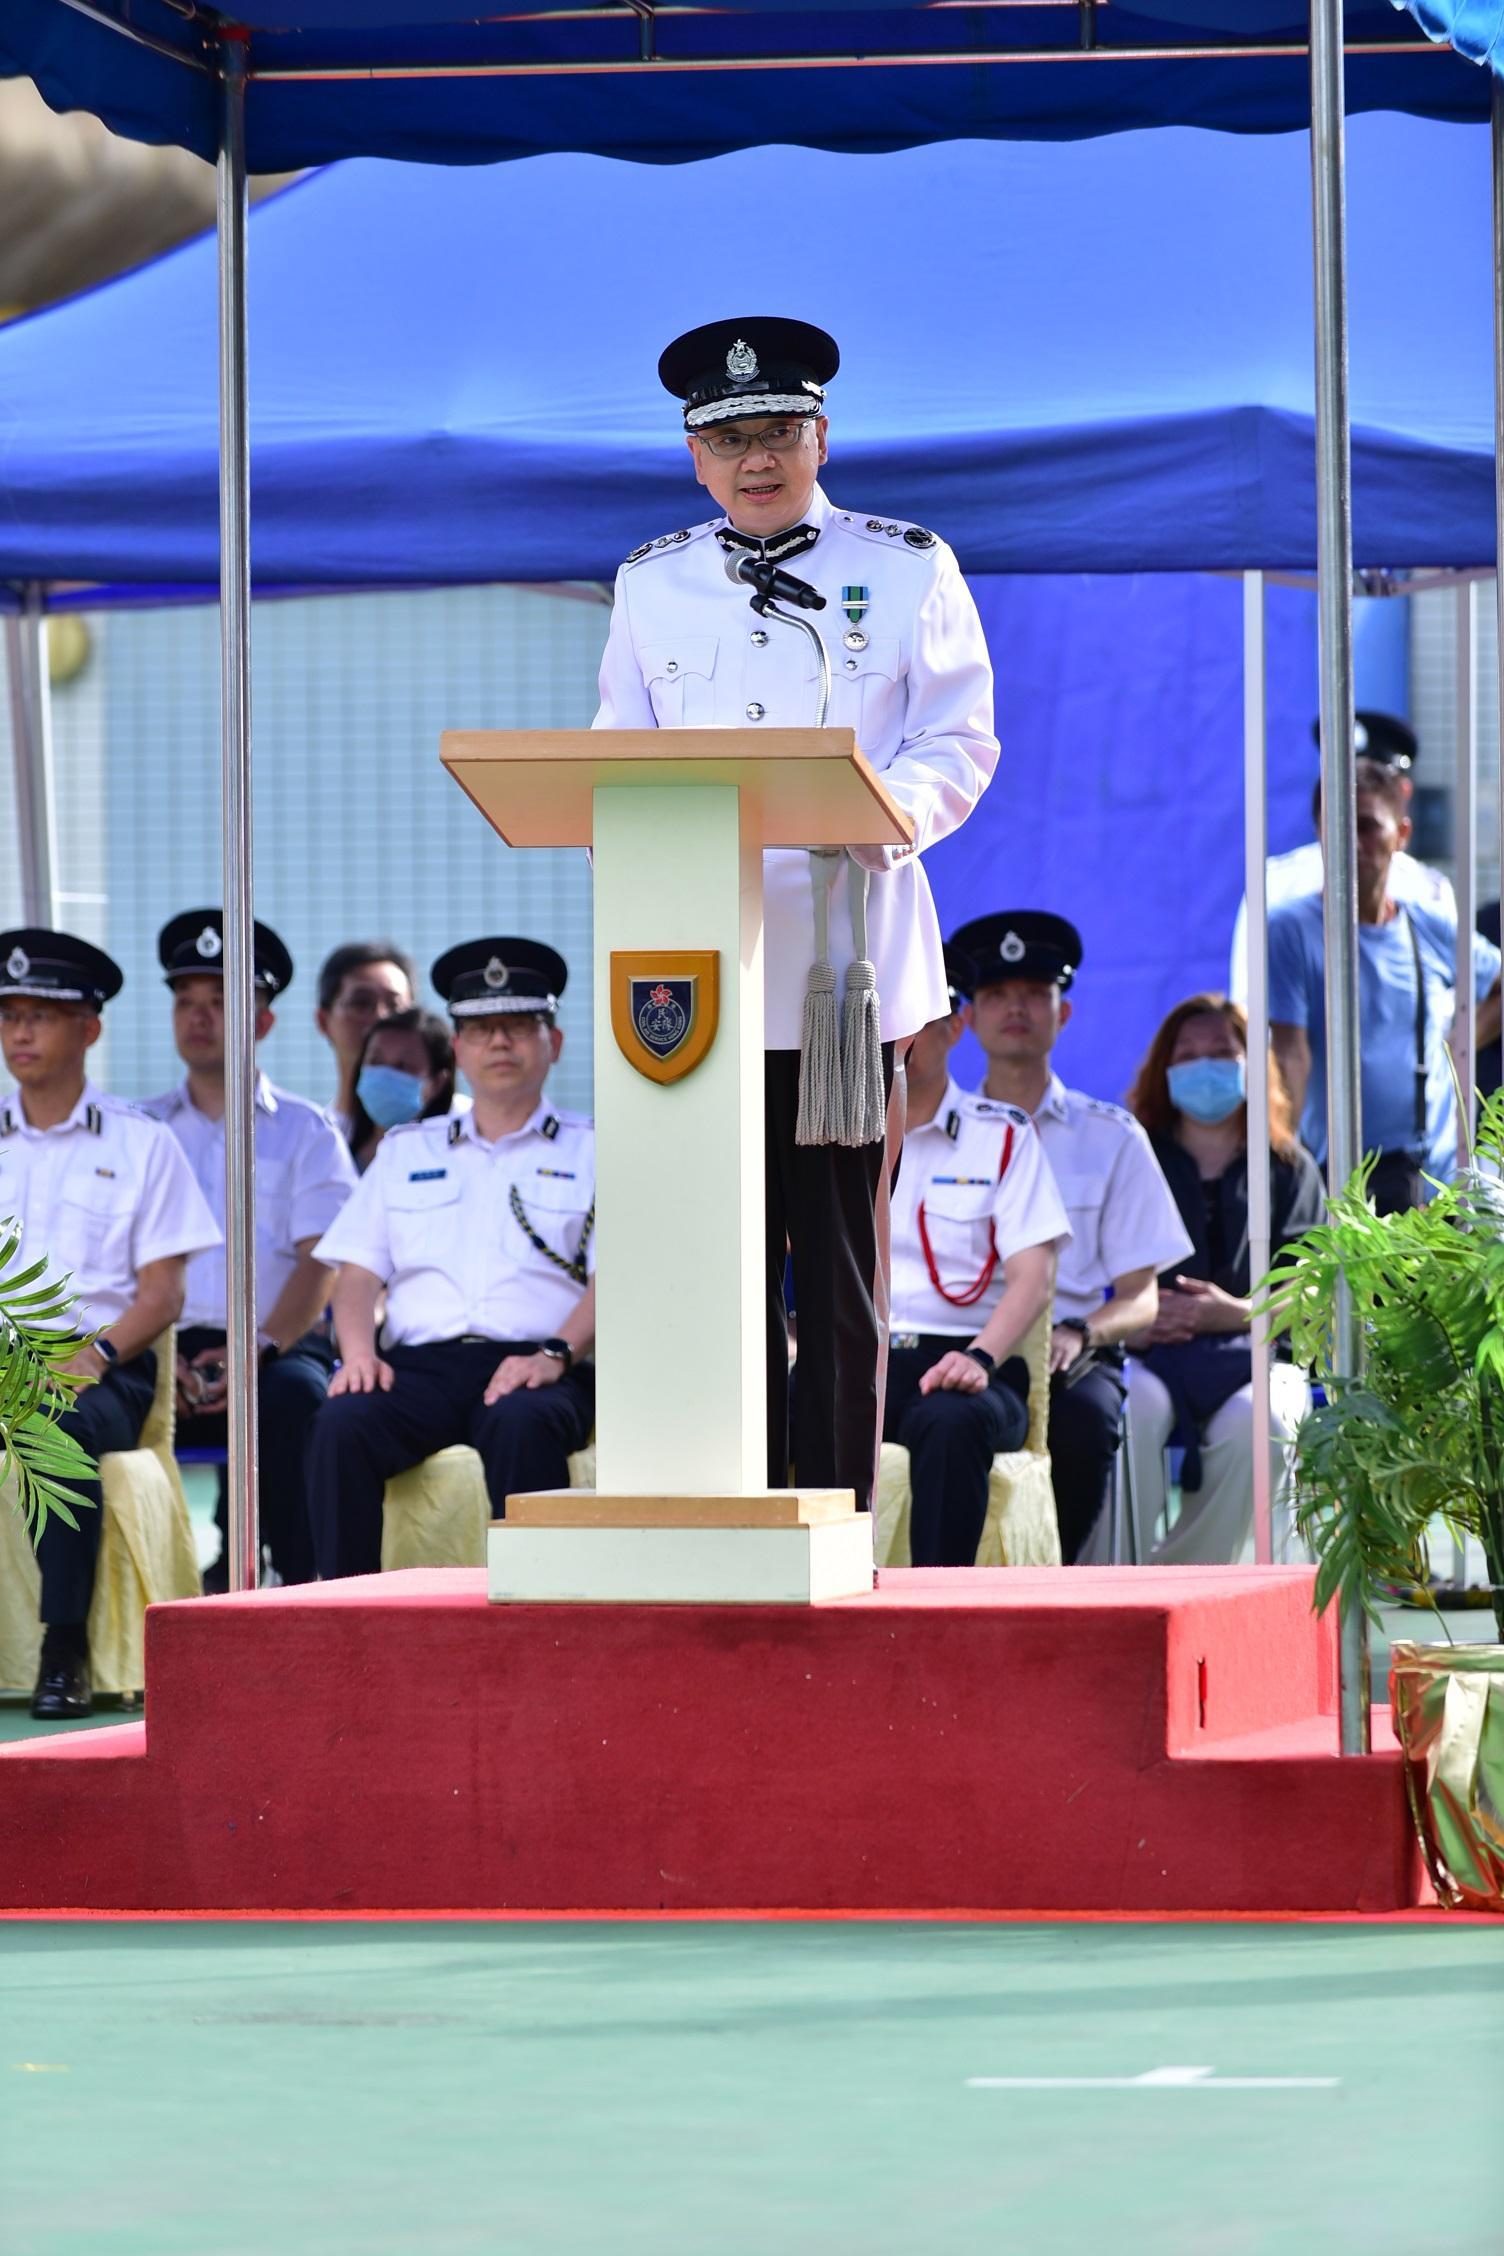 The Acting Director of Immigration, Mr Benson Kwok, delivered a speech at the Civil Aid Service Cadet Corps Foot Drill Competition 2023 today (August 27).